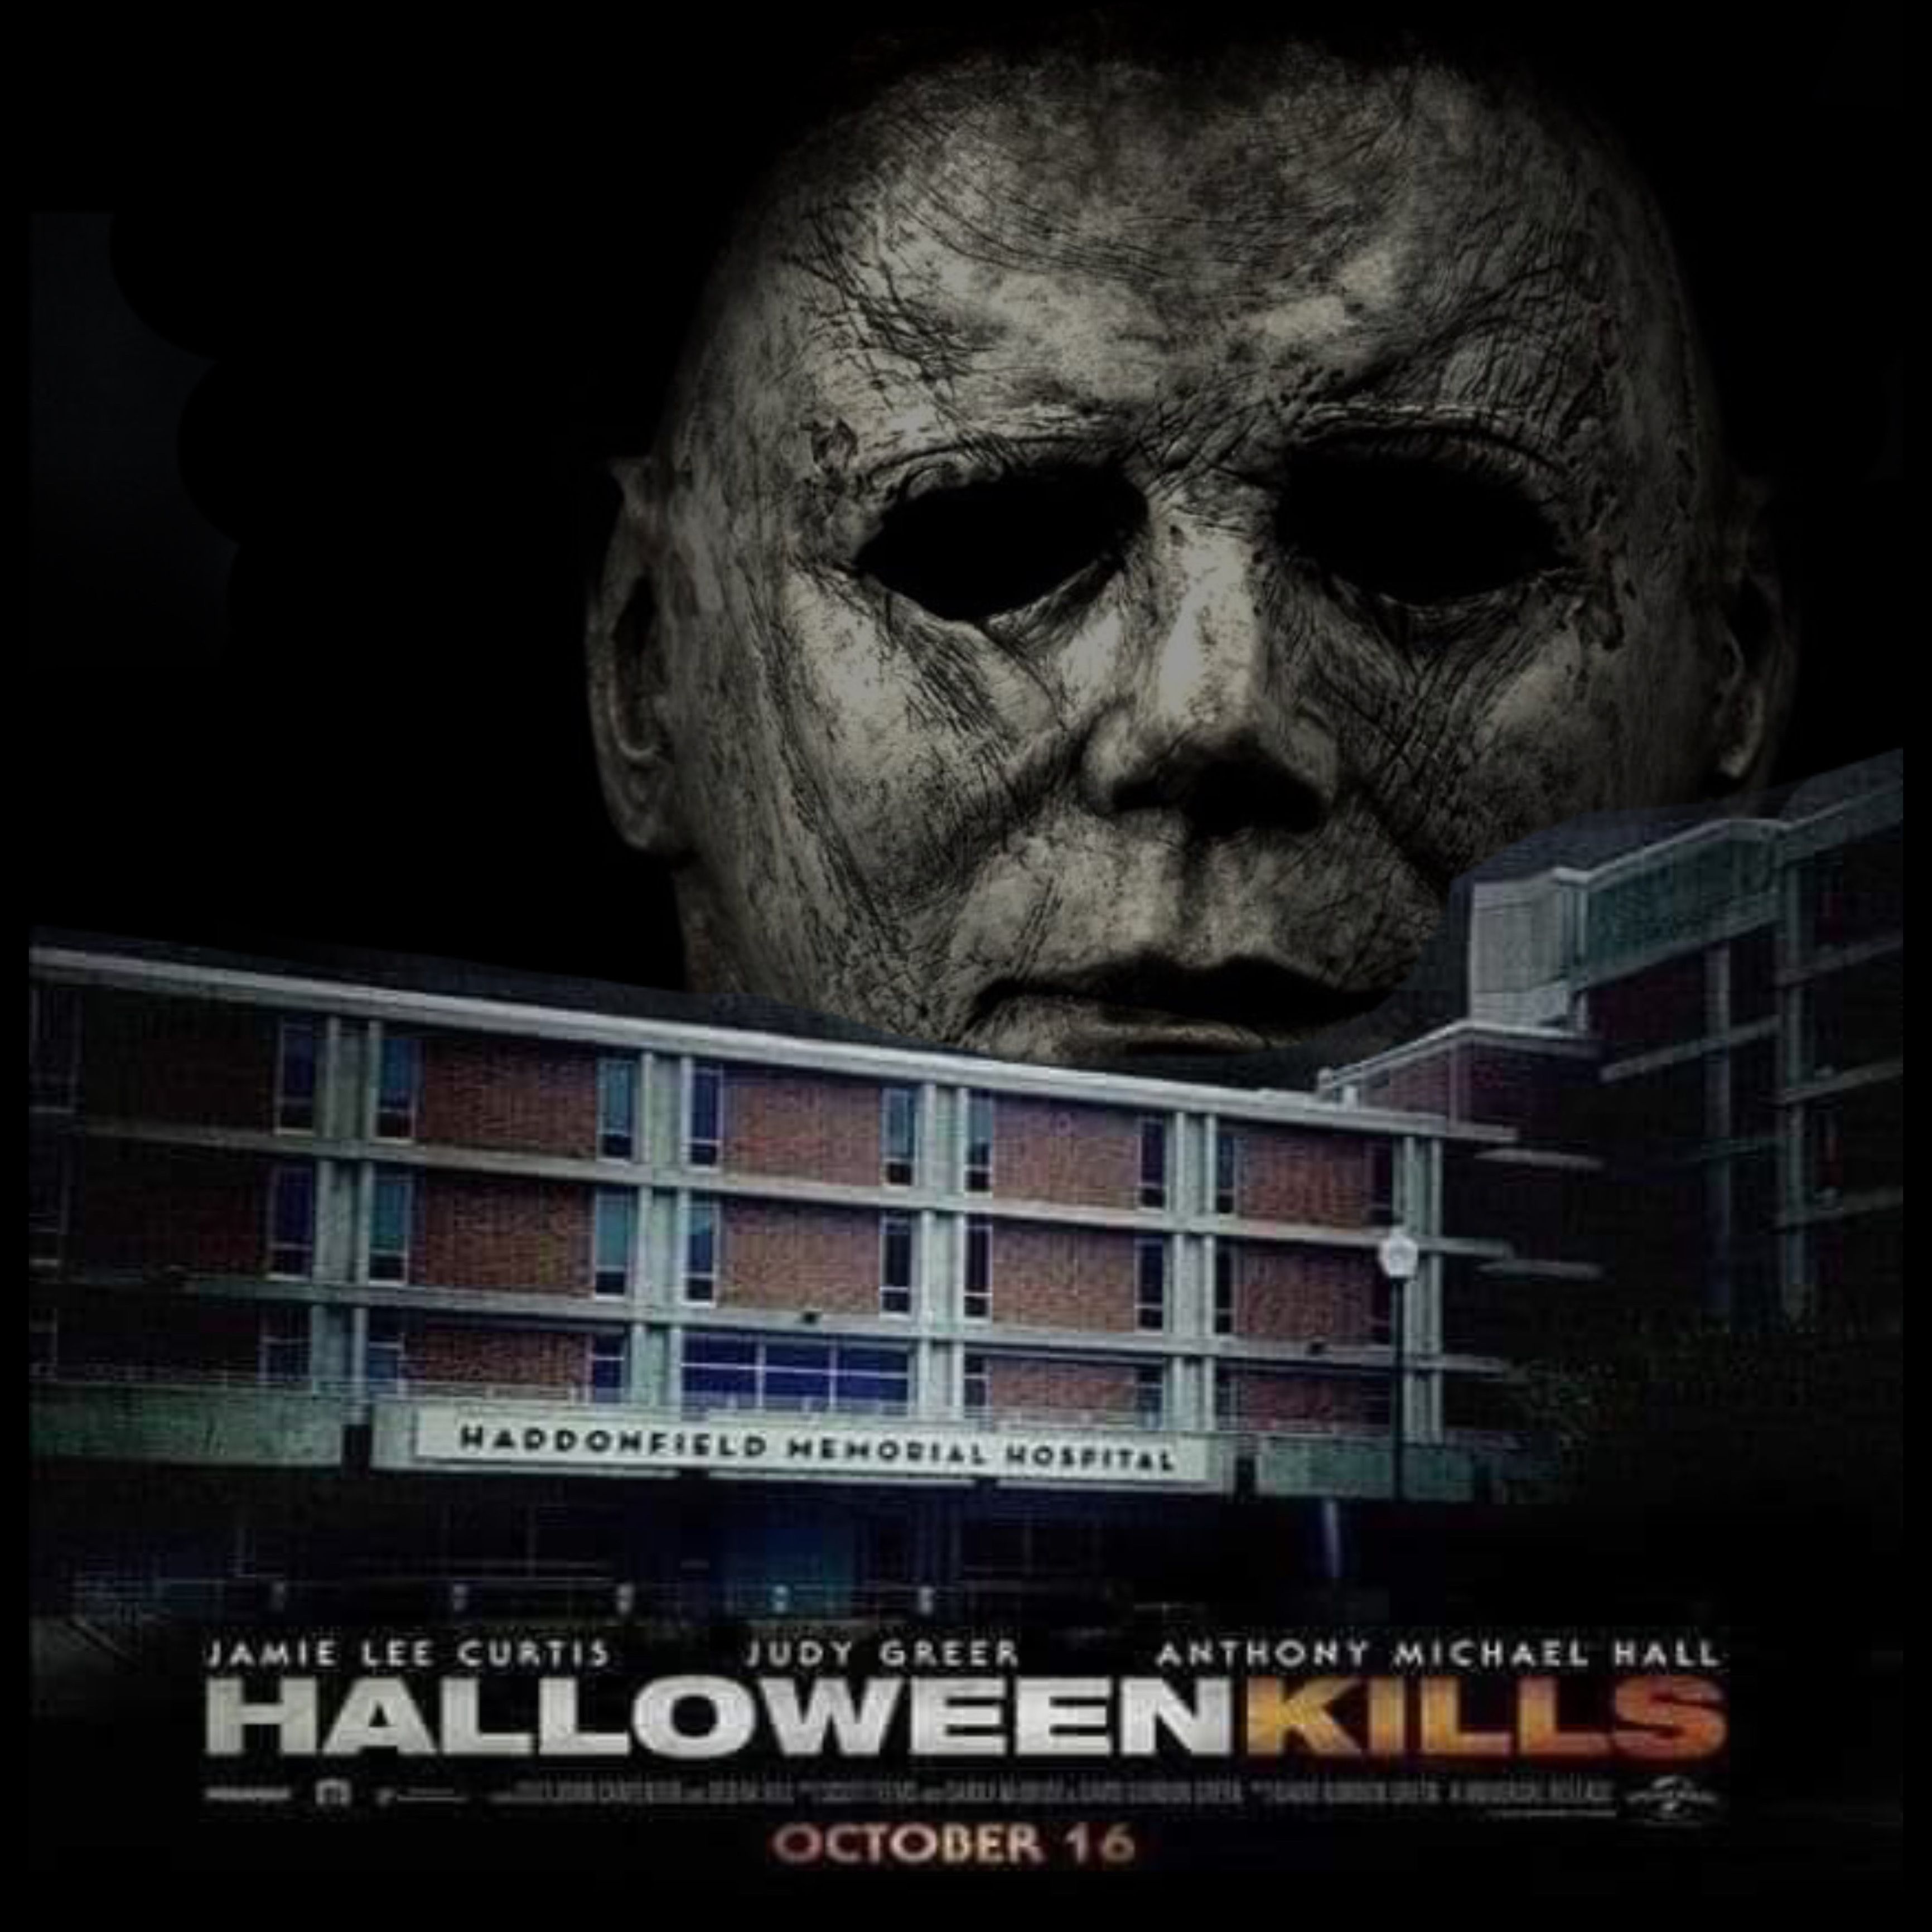 Halloween kills fan poster. Michael myers, Fun to be one, Anthony michael hall